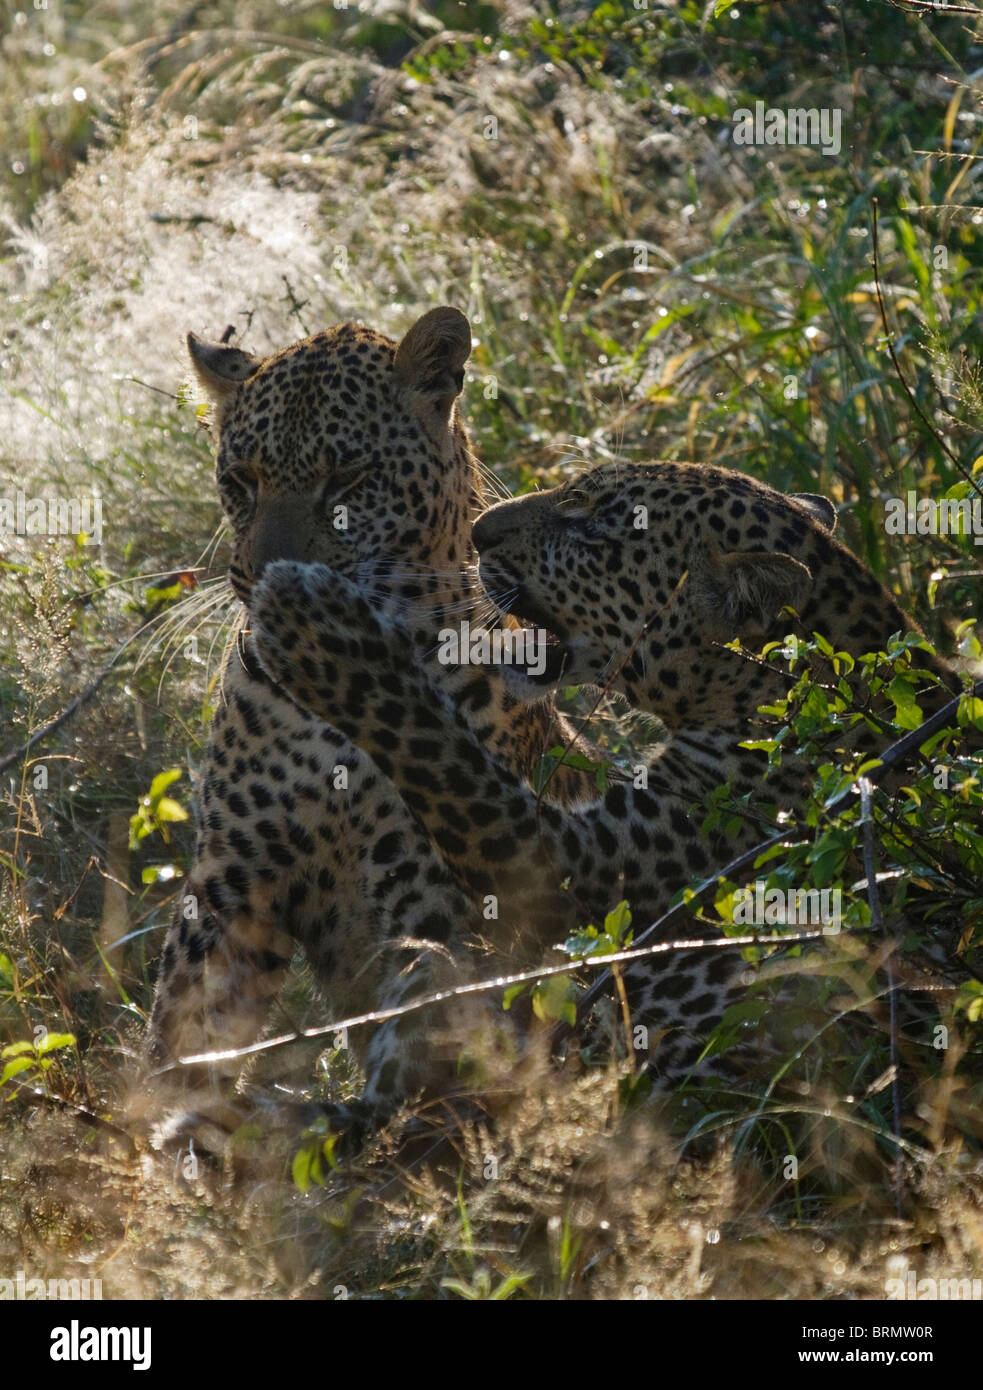 Two leopards play fighting Stock Photo